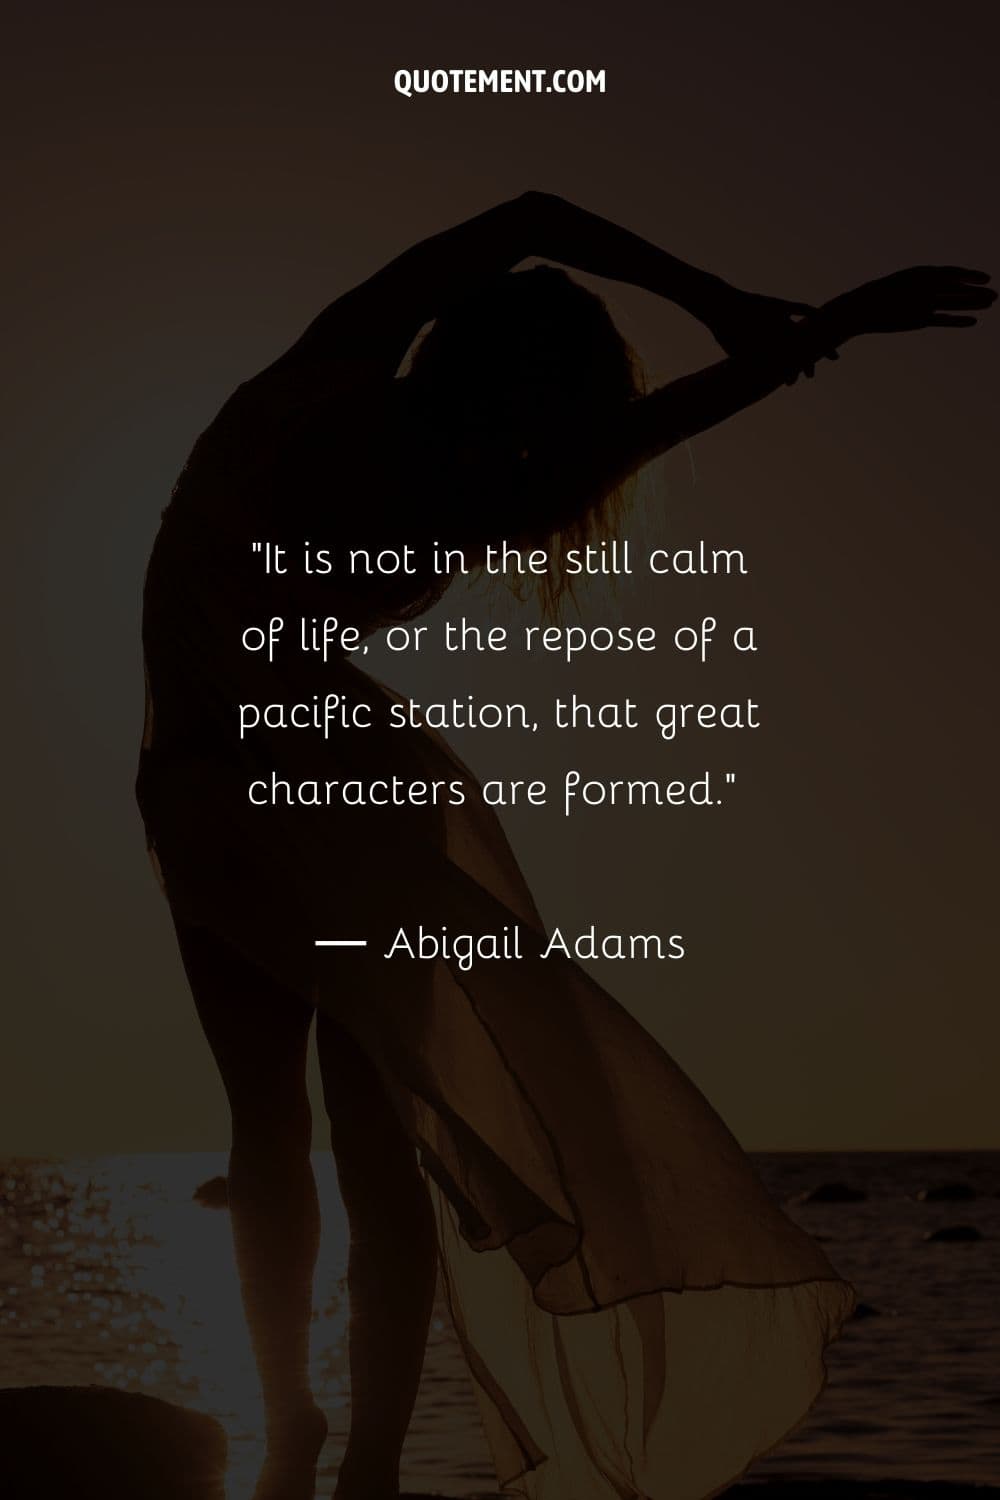 It is not in the still calm of life, or the repose of a pacific station, that great characters are formed